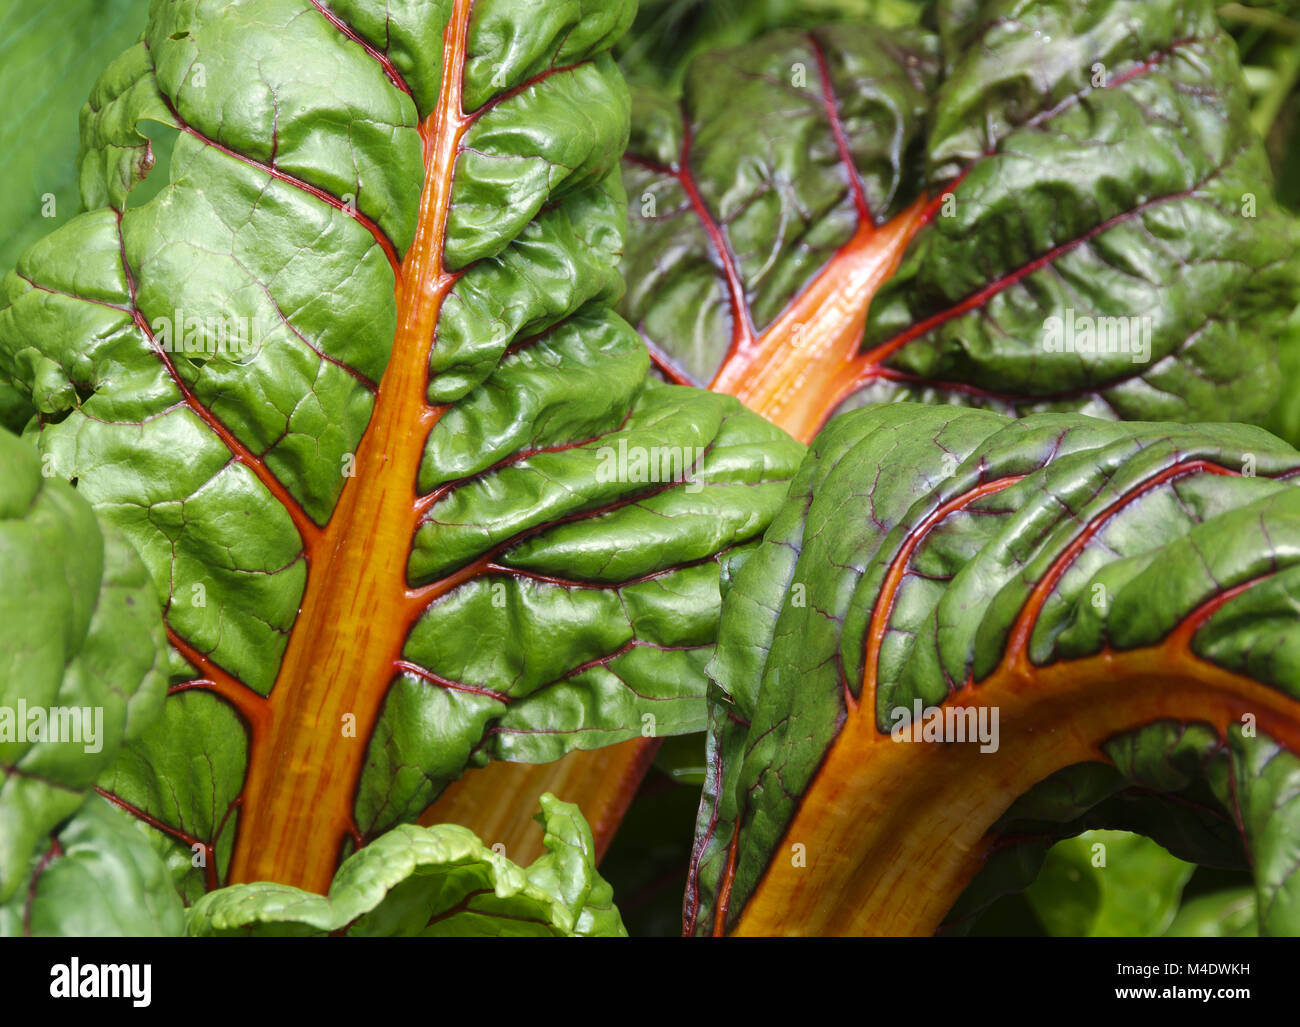 chard with red stems and veins Stock Photo